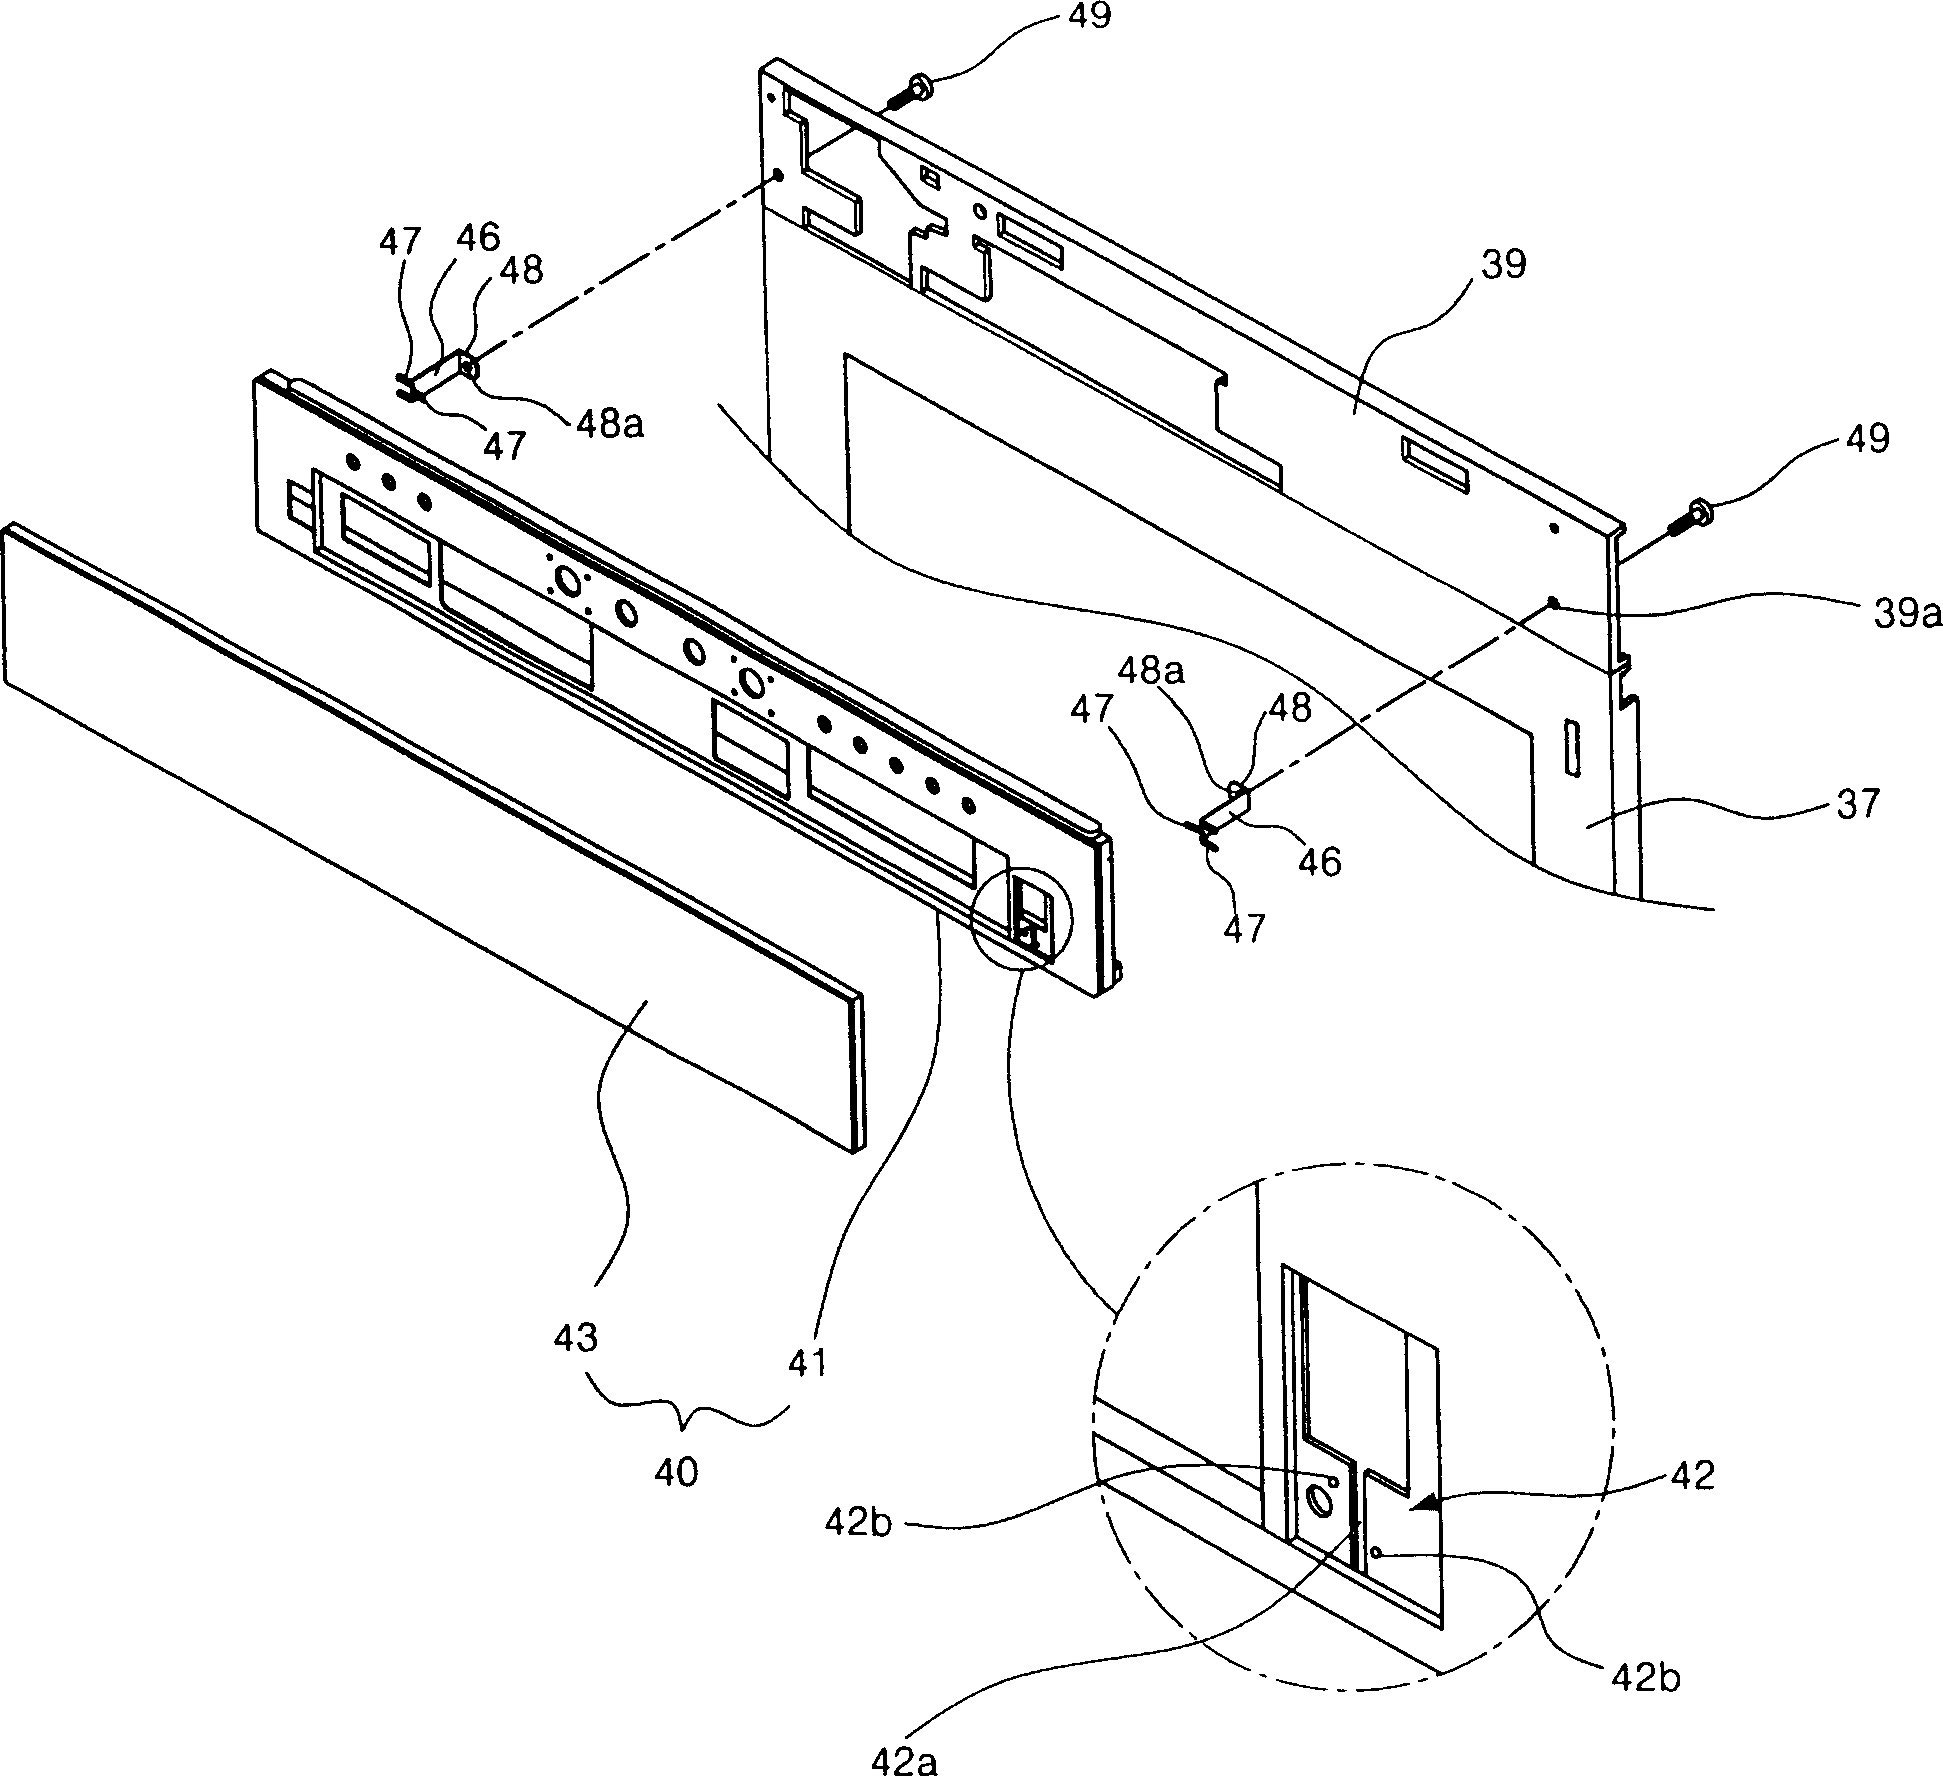 Earthing structure for control panel of microwave oven